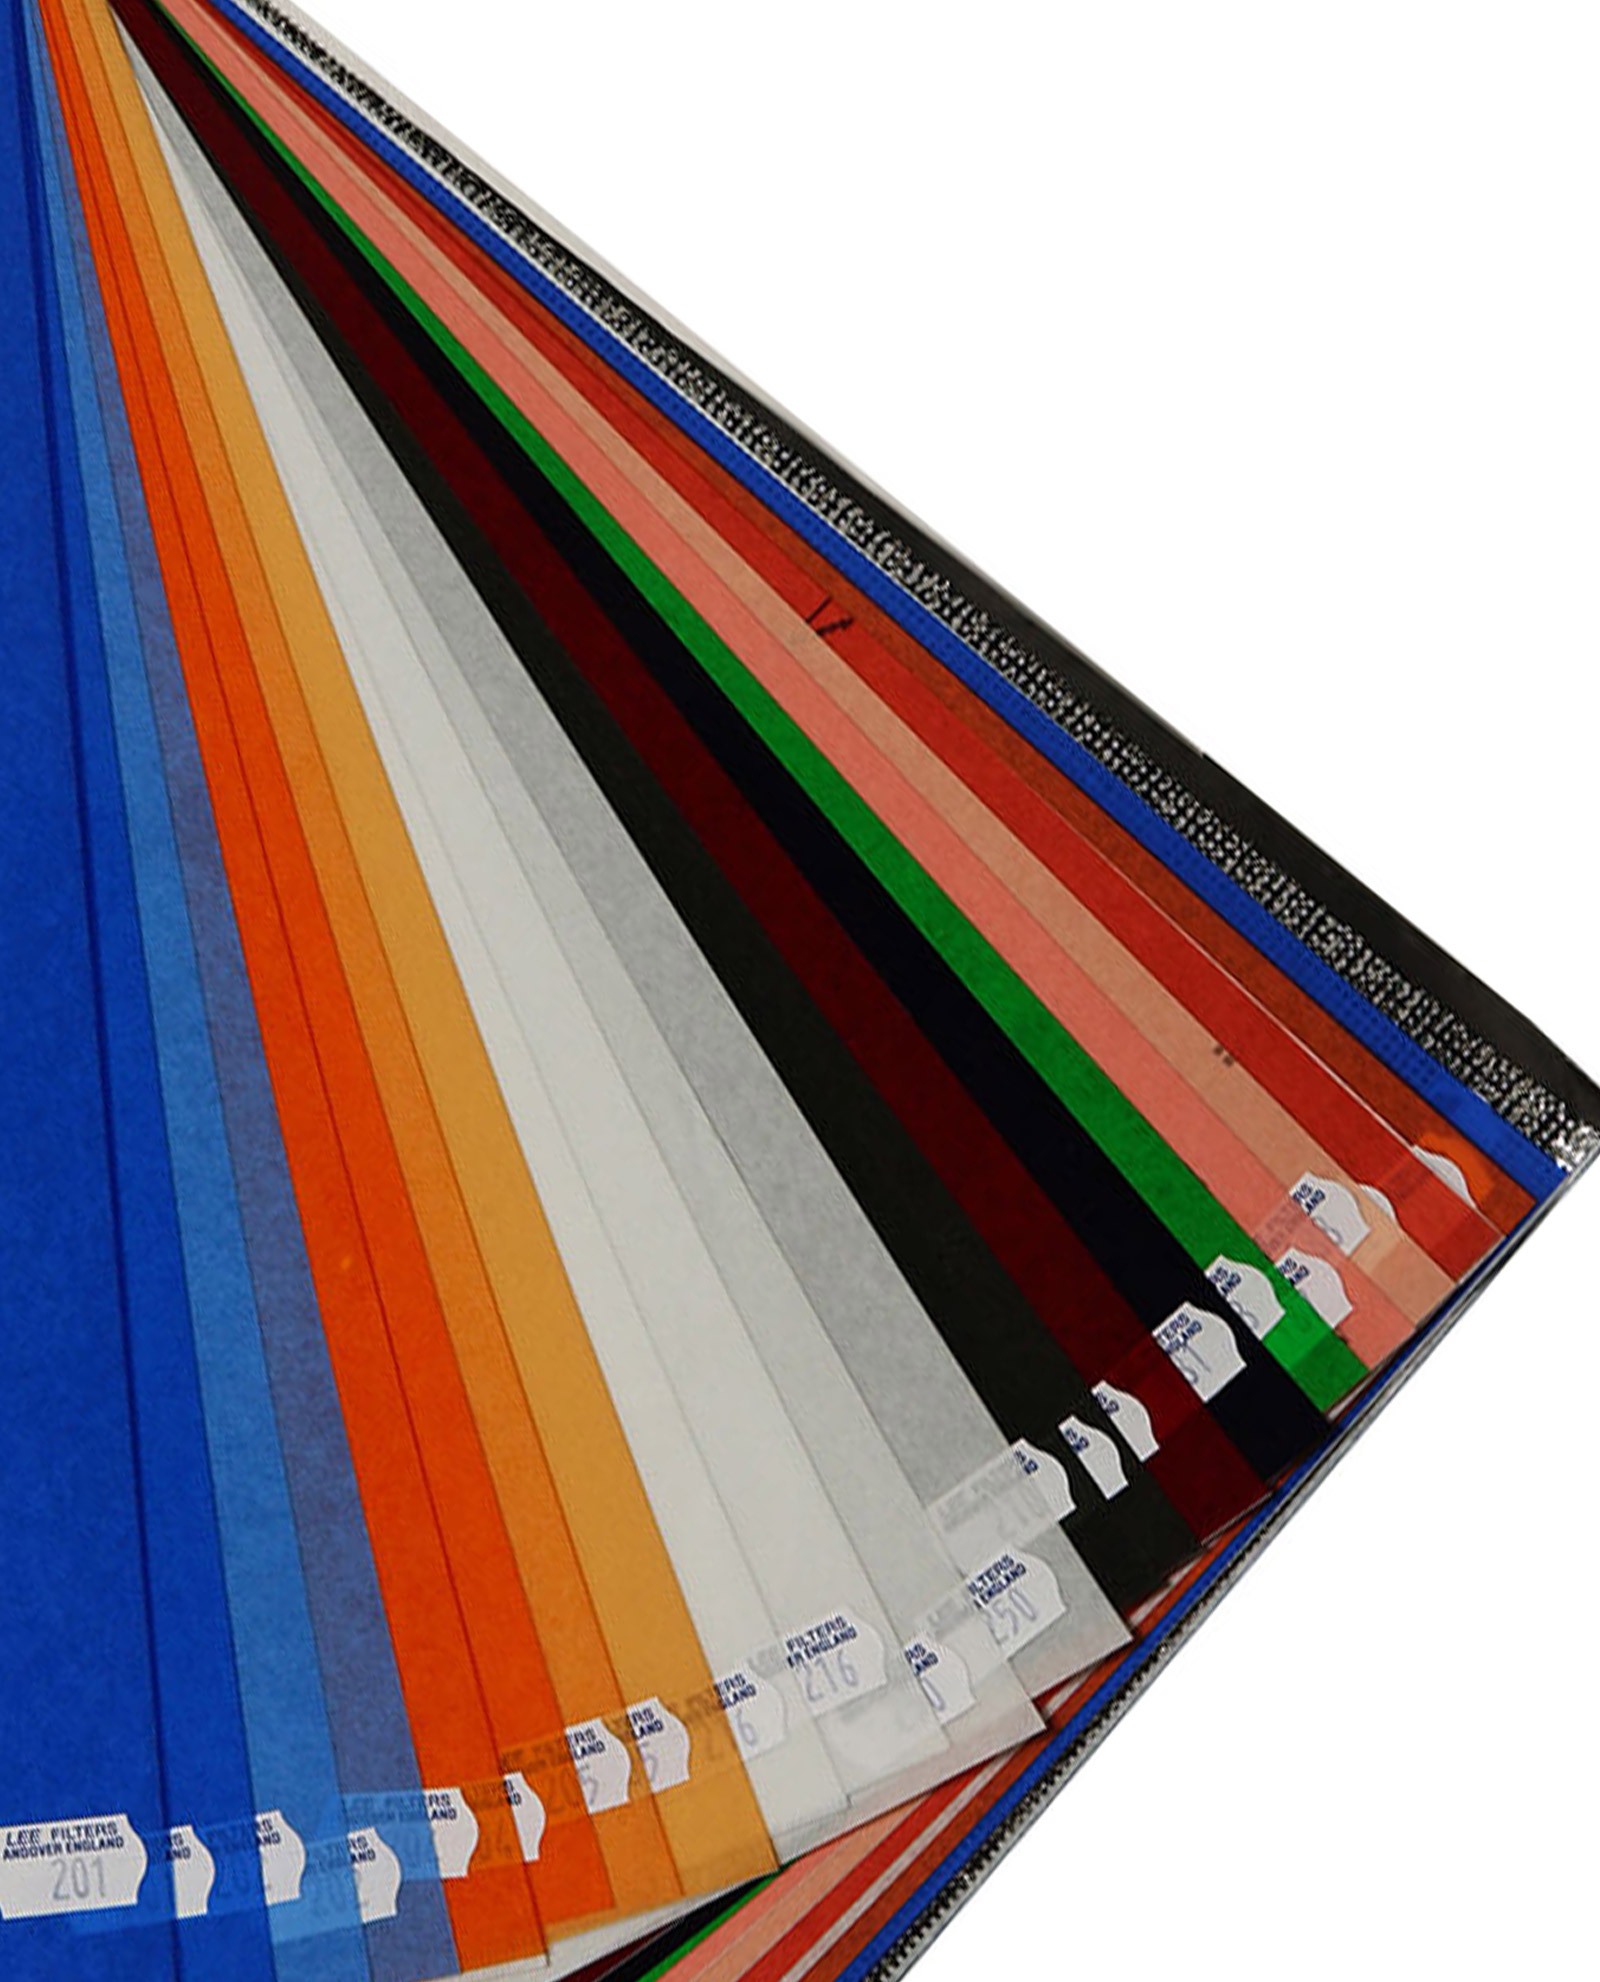 Lee Filters Full Sheets 1.2m X 0.53m